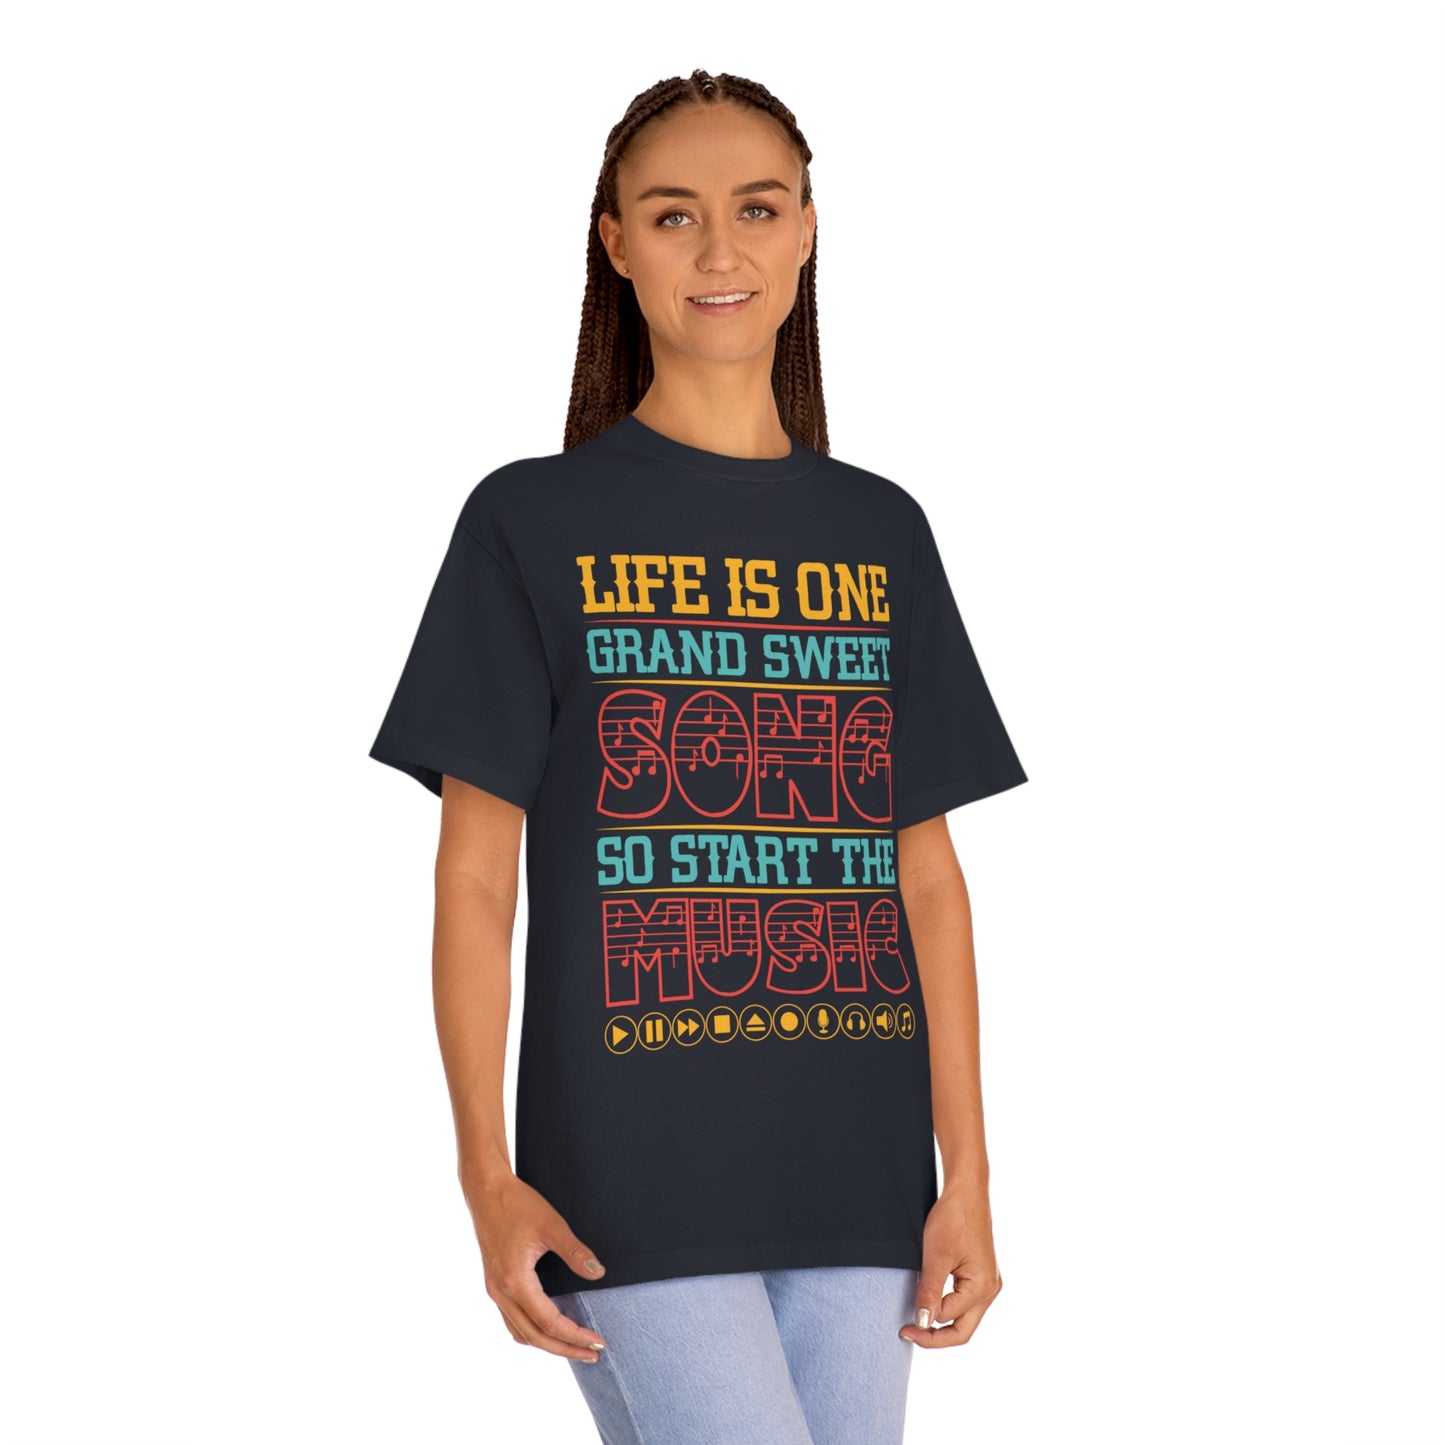 Life is one grand sweet song so start the music Unisex Classic Tee